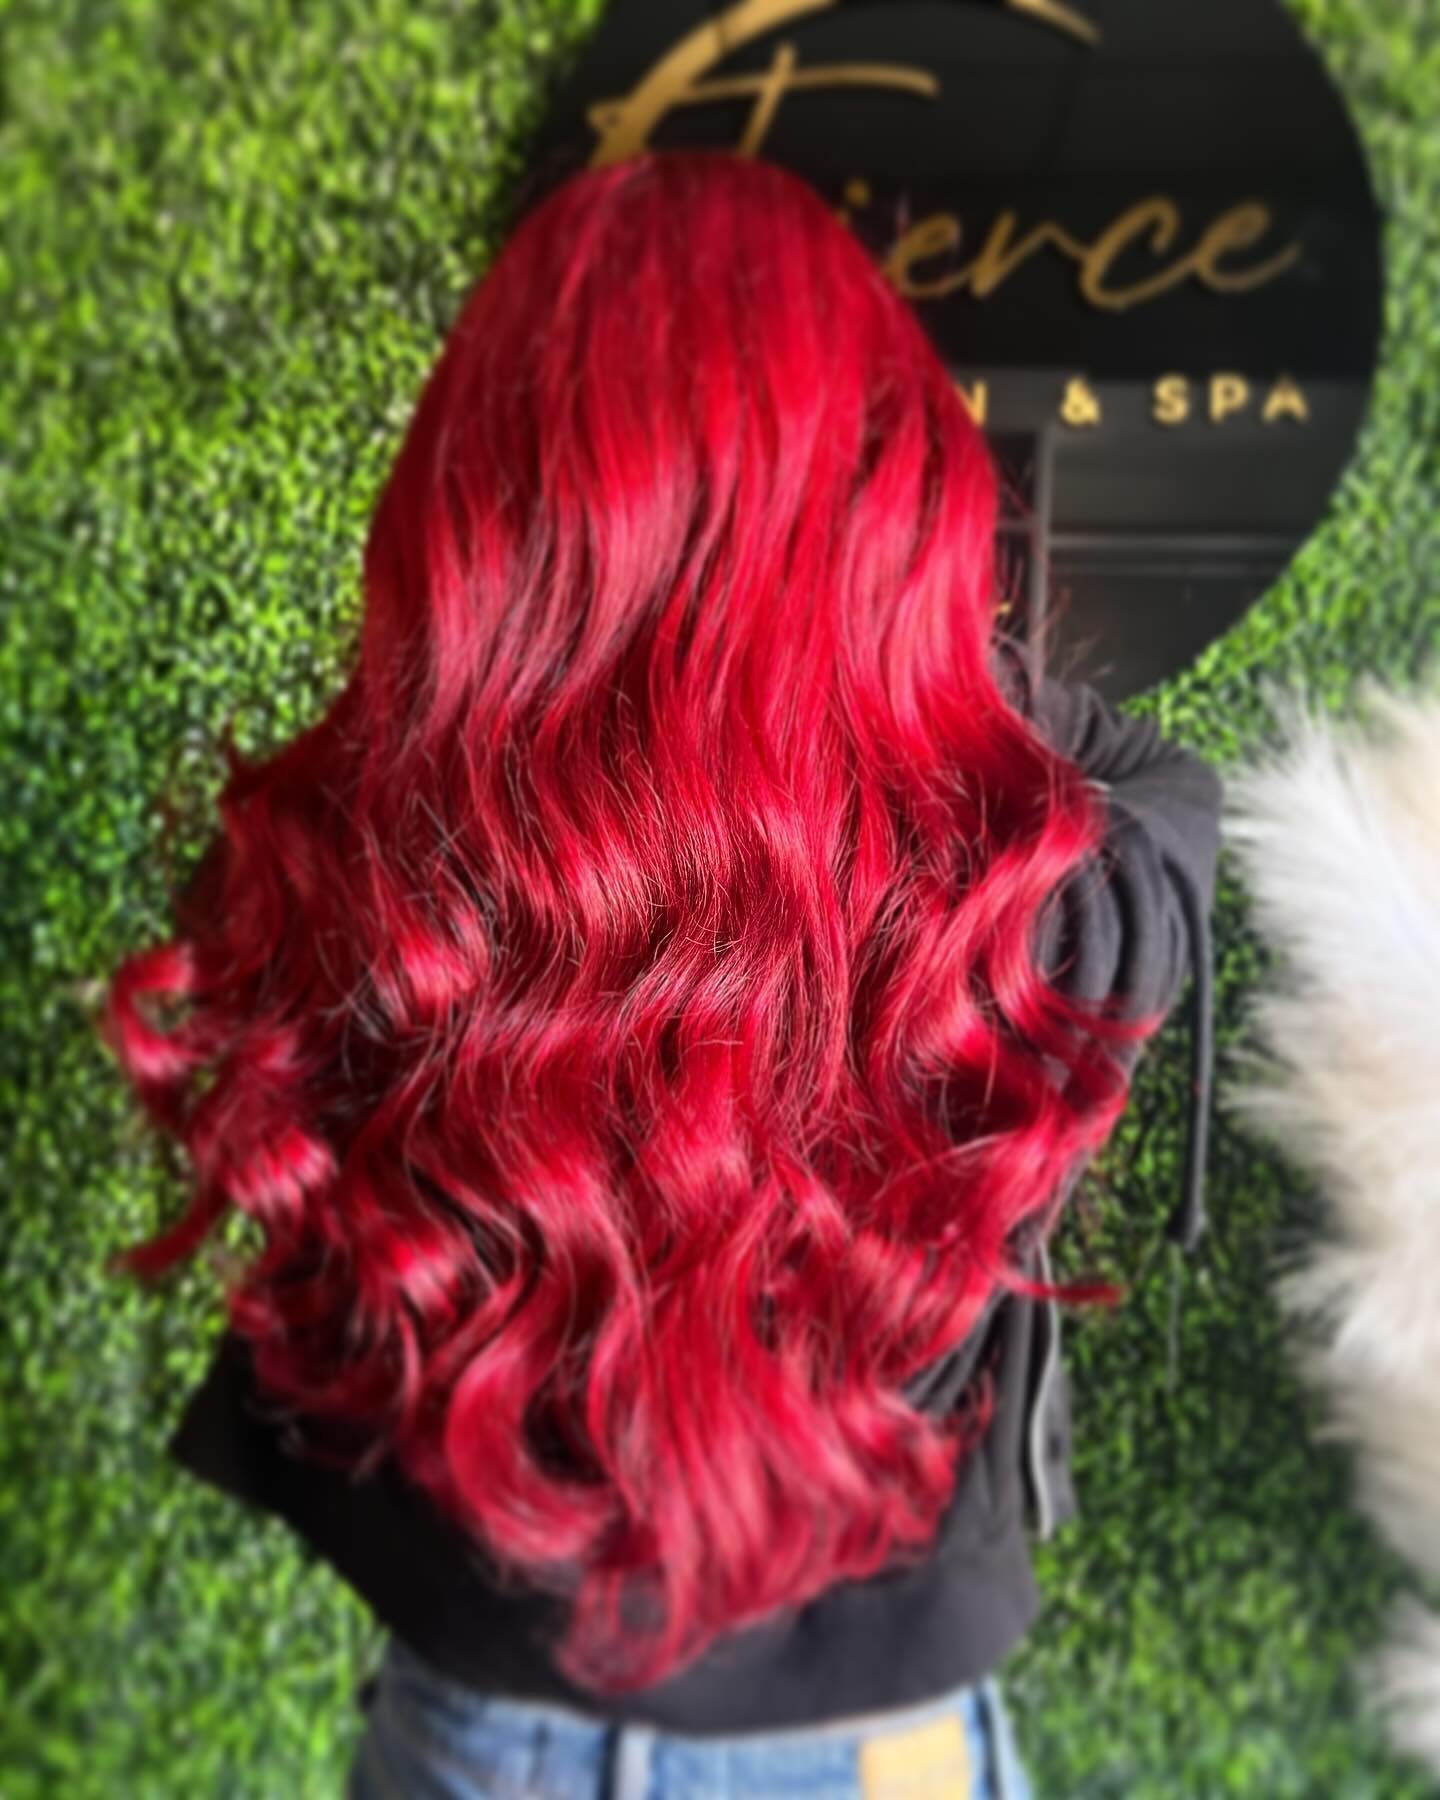 There&rsquo;s blondes &amp; brunettes but nothing like red heads😏 
&bull;
&bull;
&bull;
#redhair #redhairdontcare #redhead #fierce #hairwave #hairstylist #licencedtocreate #behindthechair #modersalon #fabuloushair #flipshair #redhaircolor